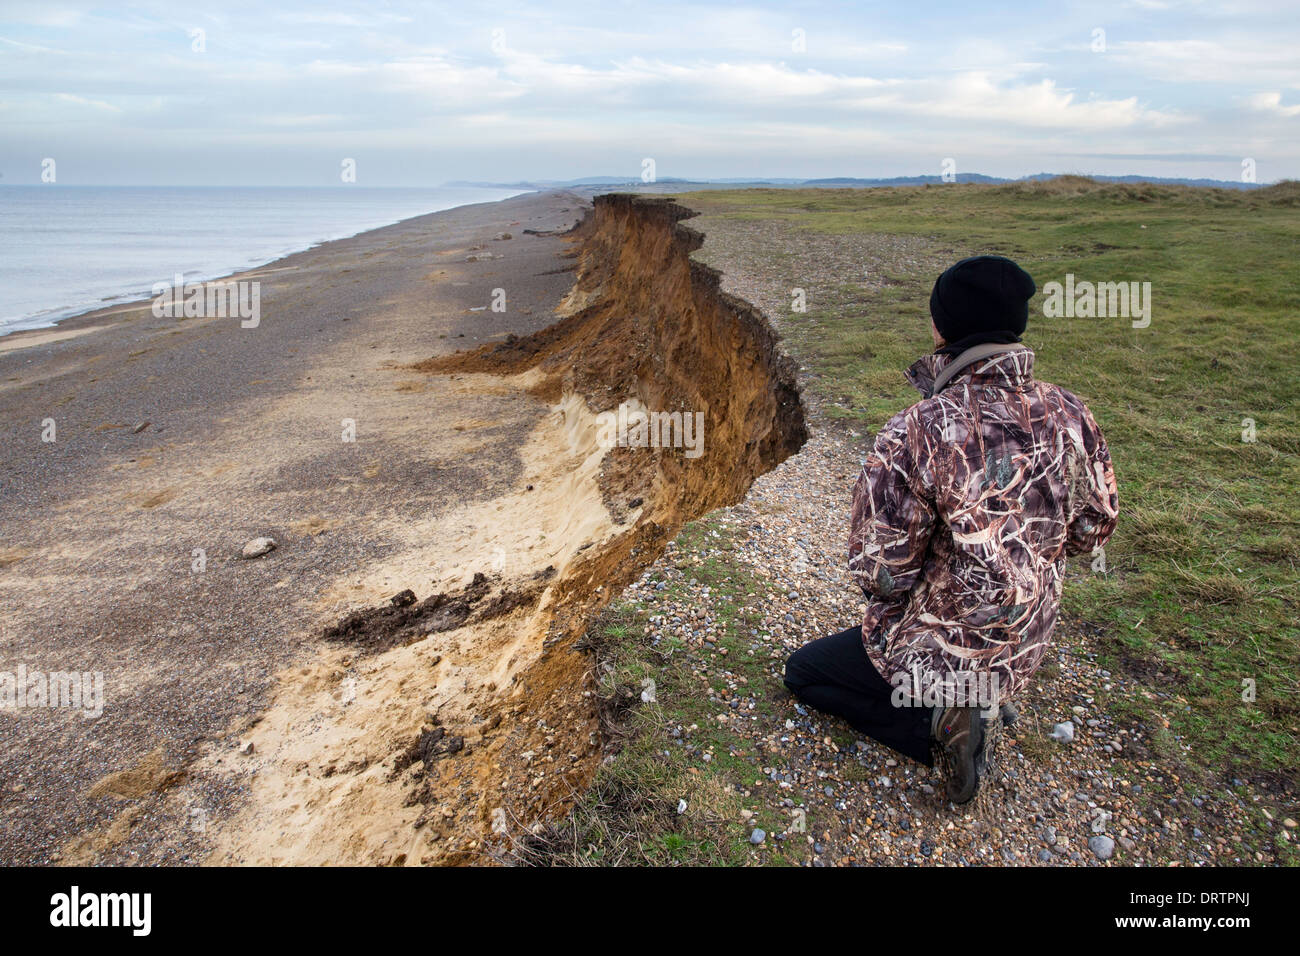 Coastal damage in North Norfolk, East Anglia, UK, following the storm surge in December 2013 Stock Photo